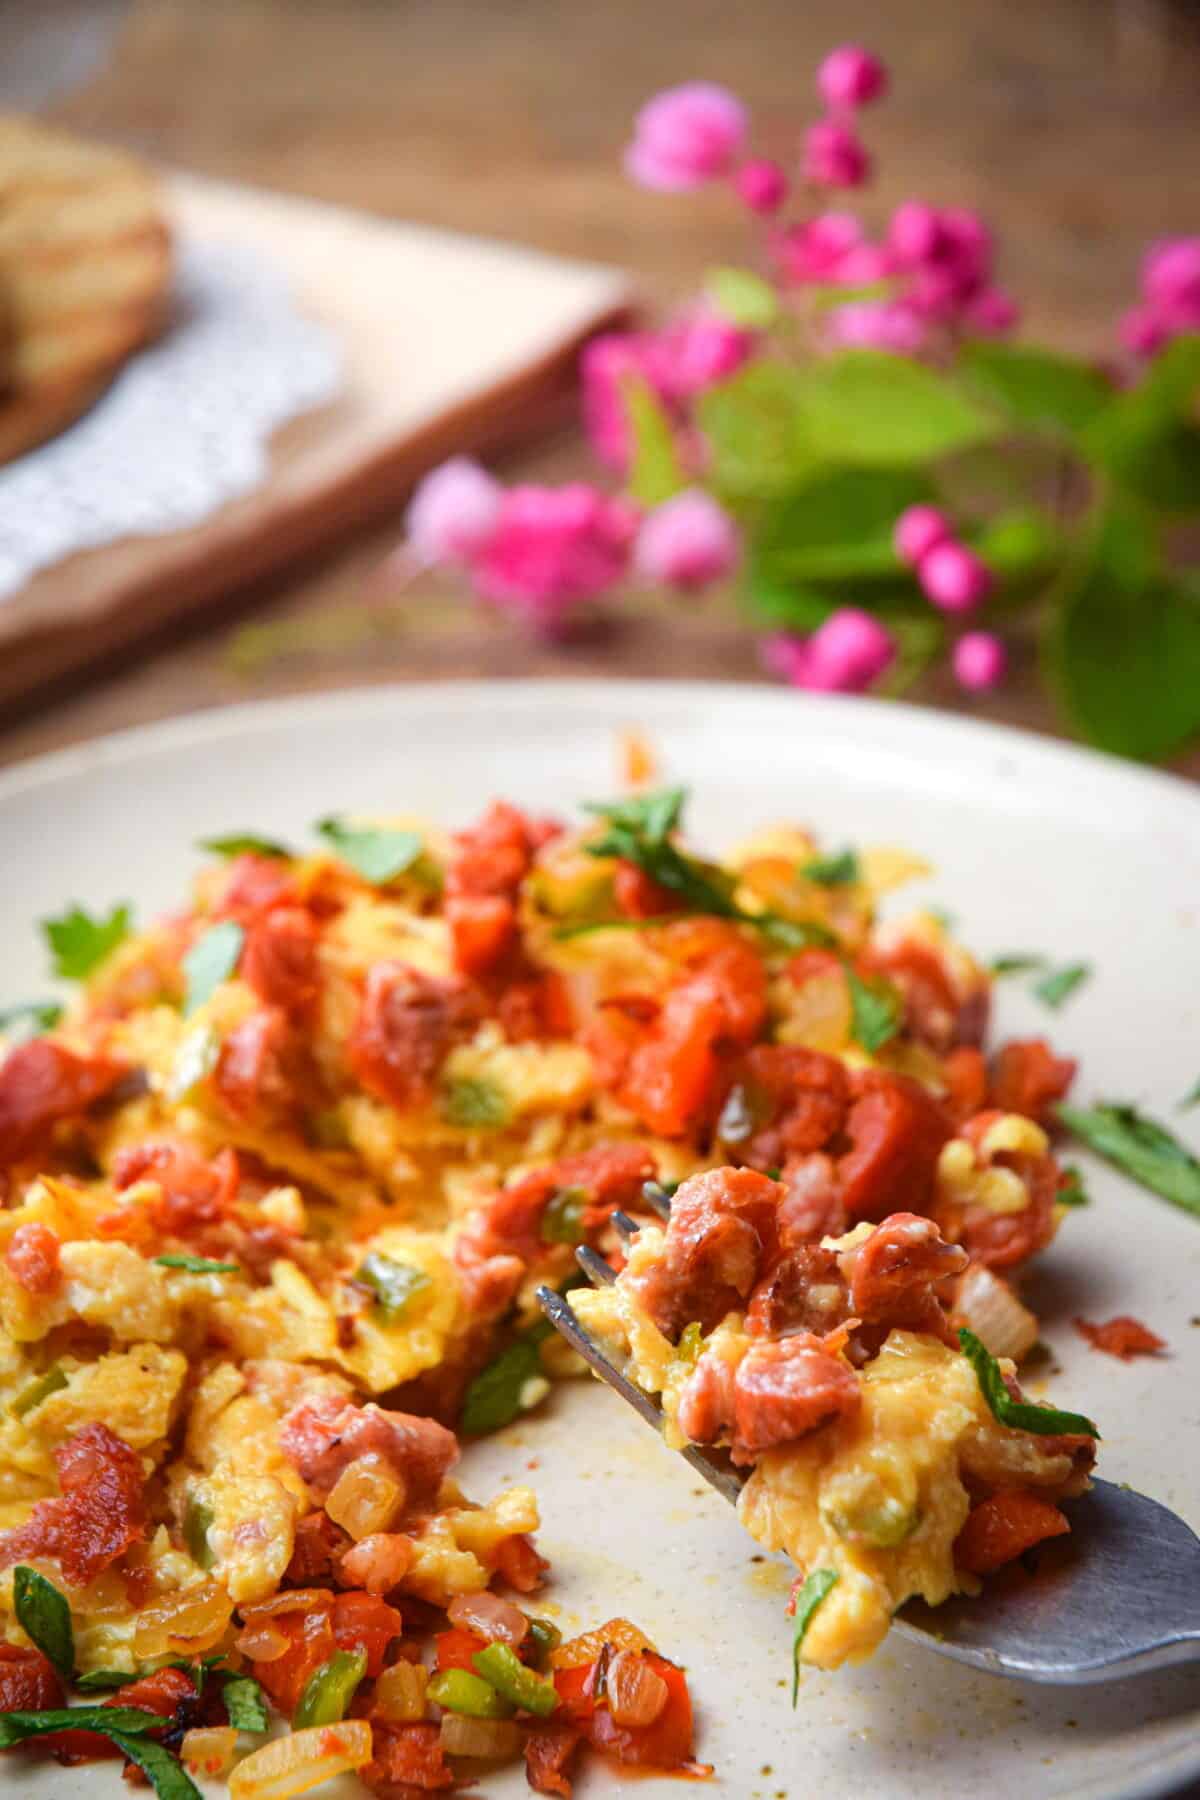 Chorizo and egg scramble on a white plate with a fork, small pink flowers on the side.